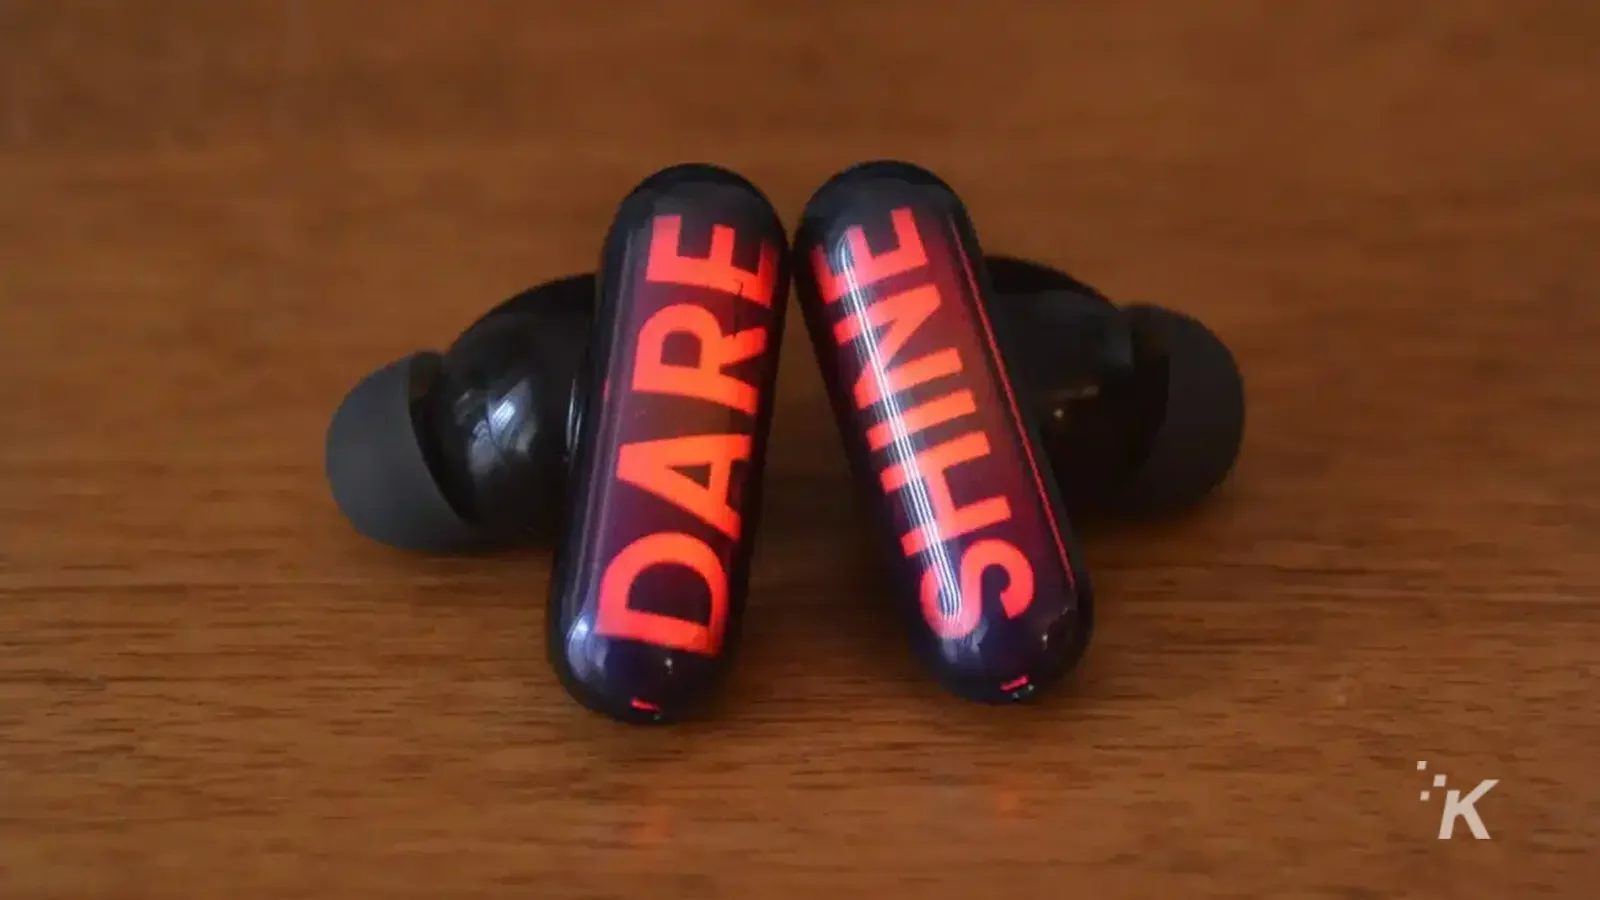 GPods earbuds with the word dare shine led on wooden table